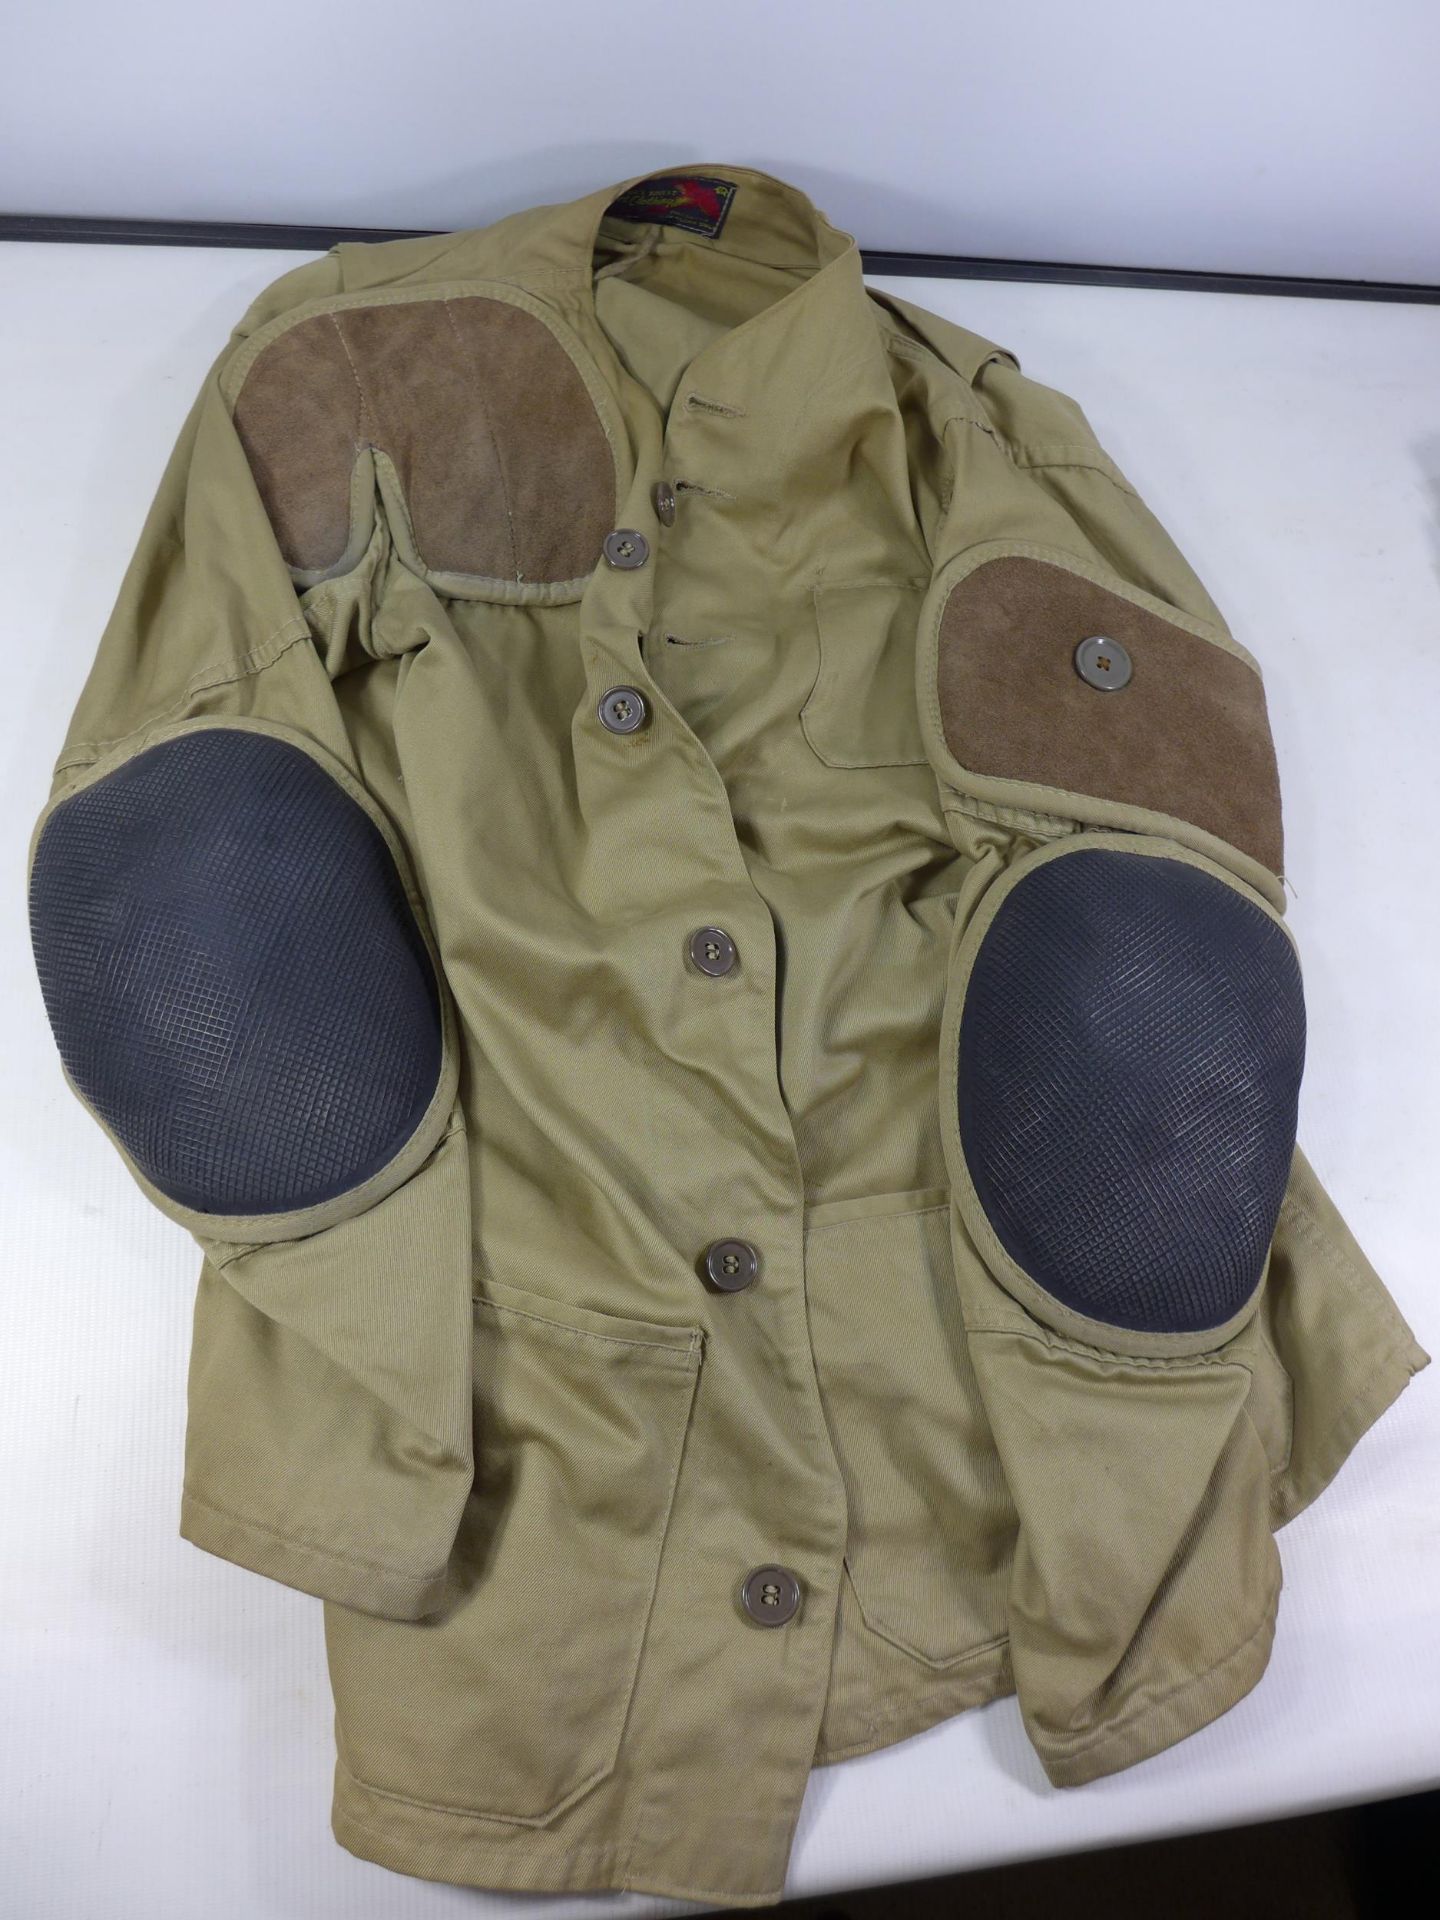 AN AMERICAN SHOOTING JACKET AND A CAMOUFLAGE COAT SIZE II